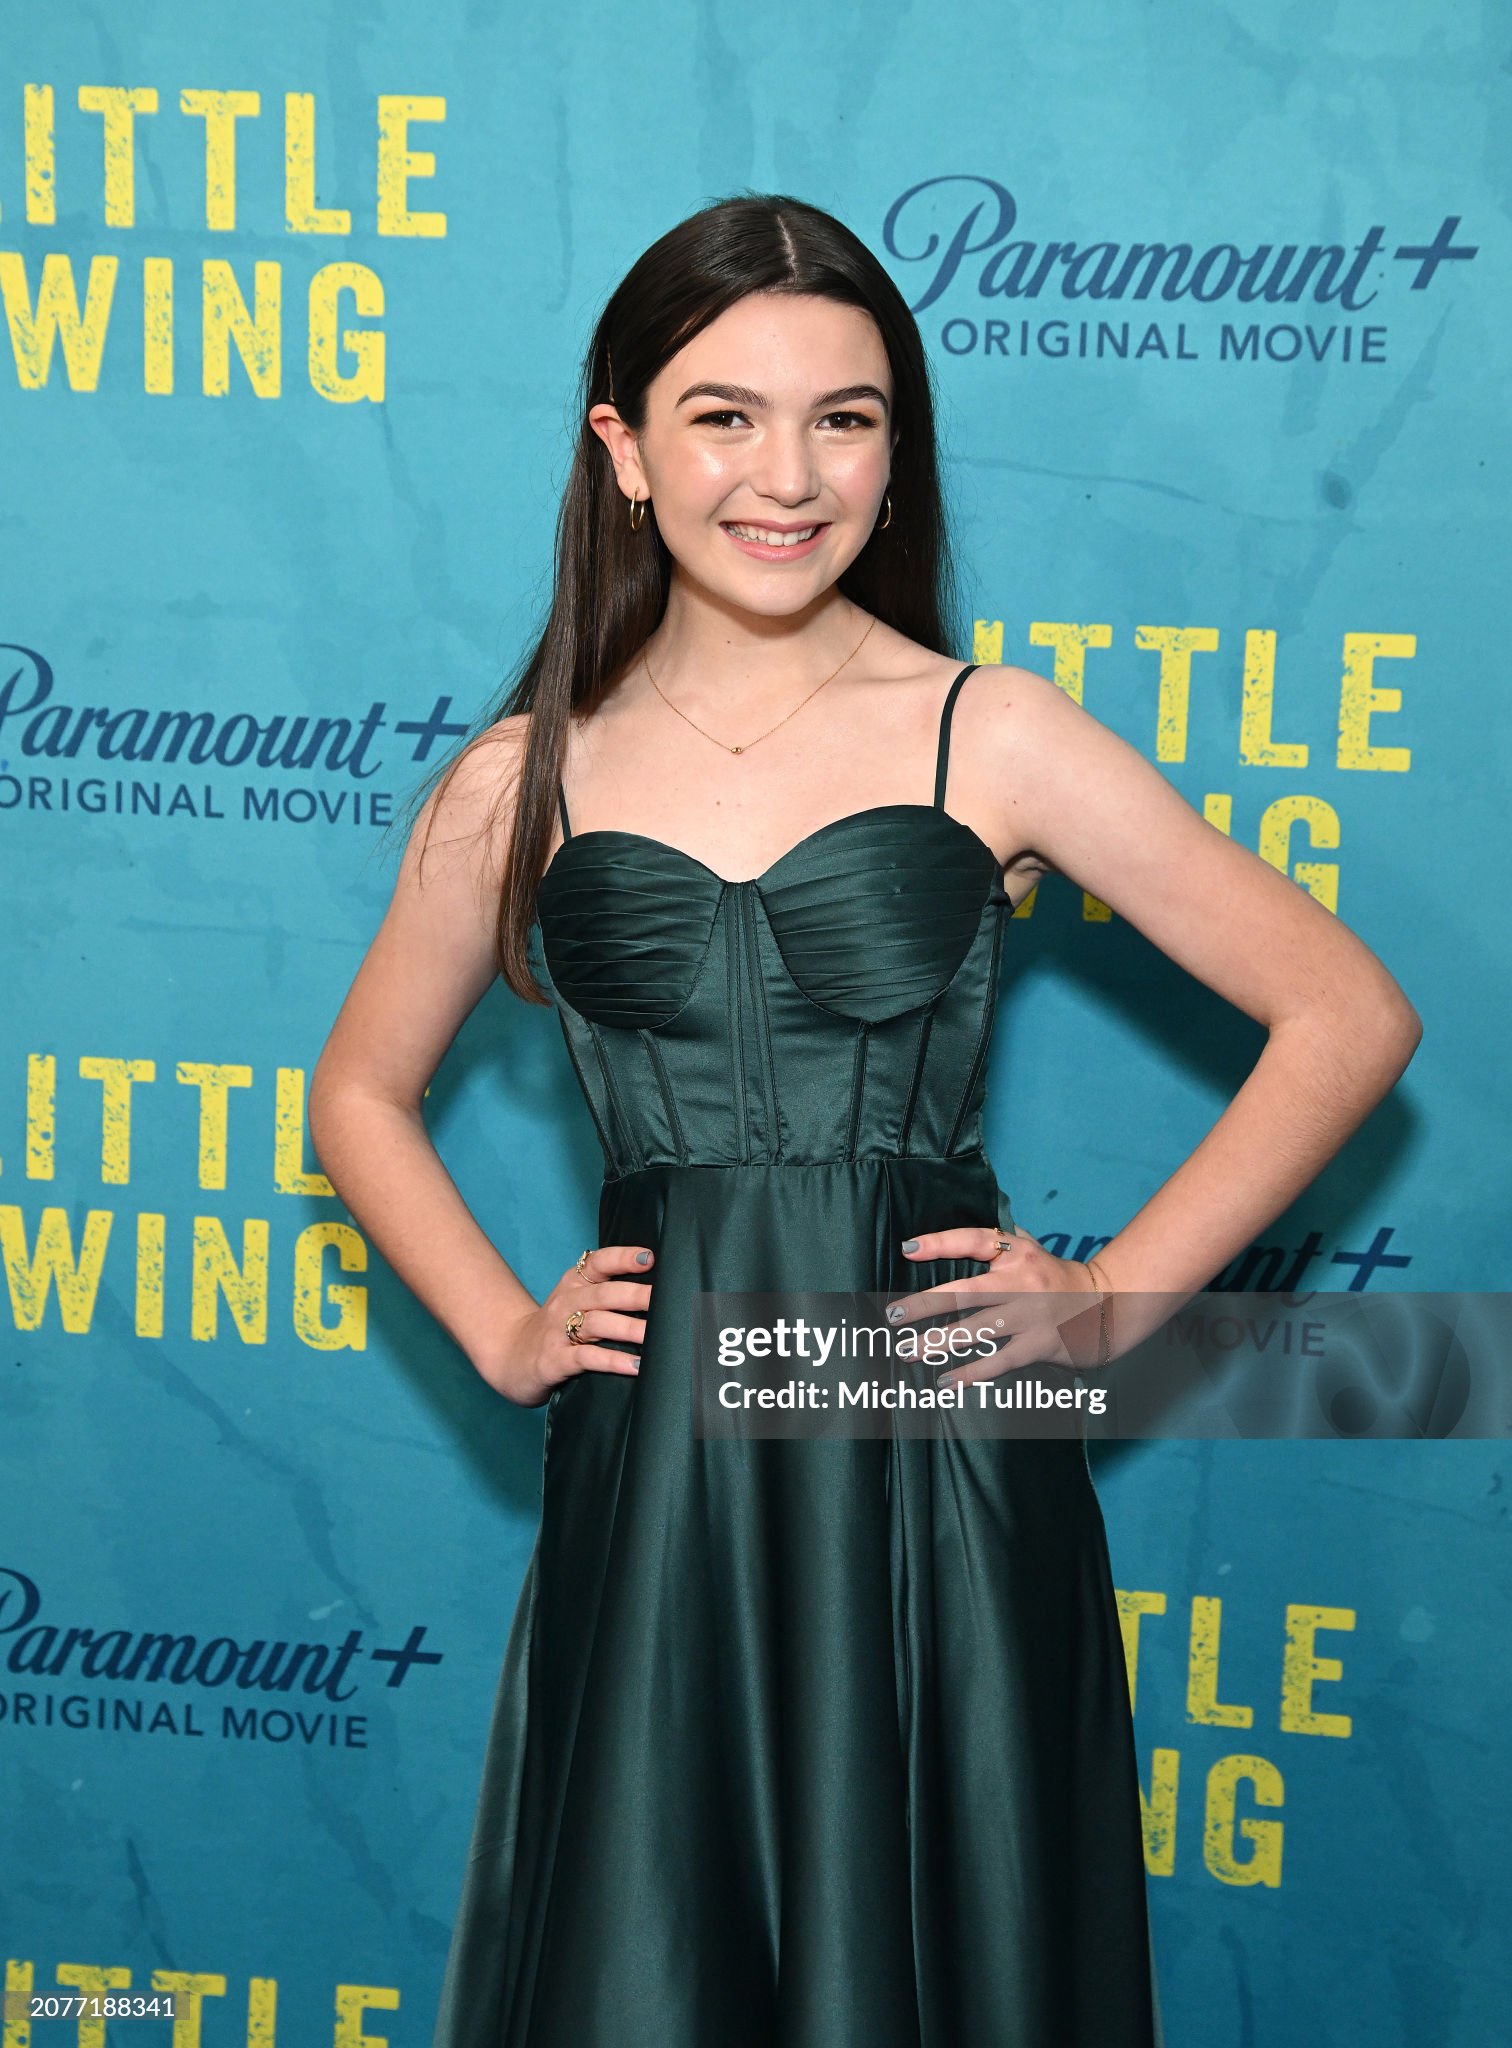 REQUEST: Brooklynn Prince - Los Angeles Tastemaker Screening Event And Red Carpet For Paramount+'s "Little Wing"